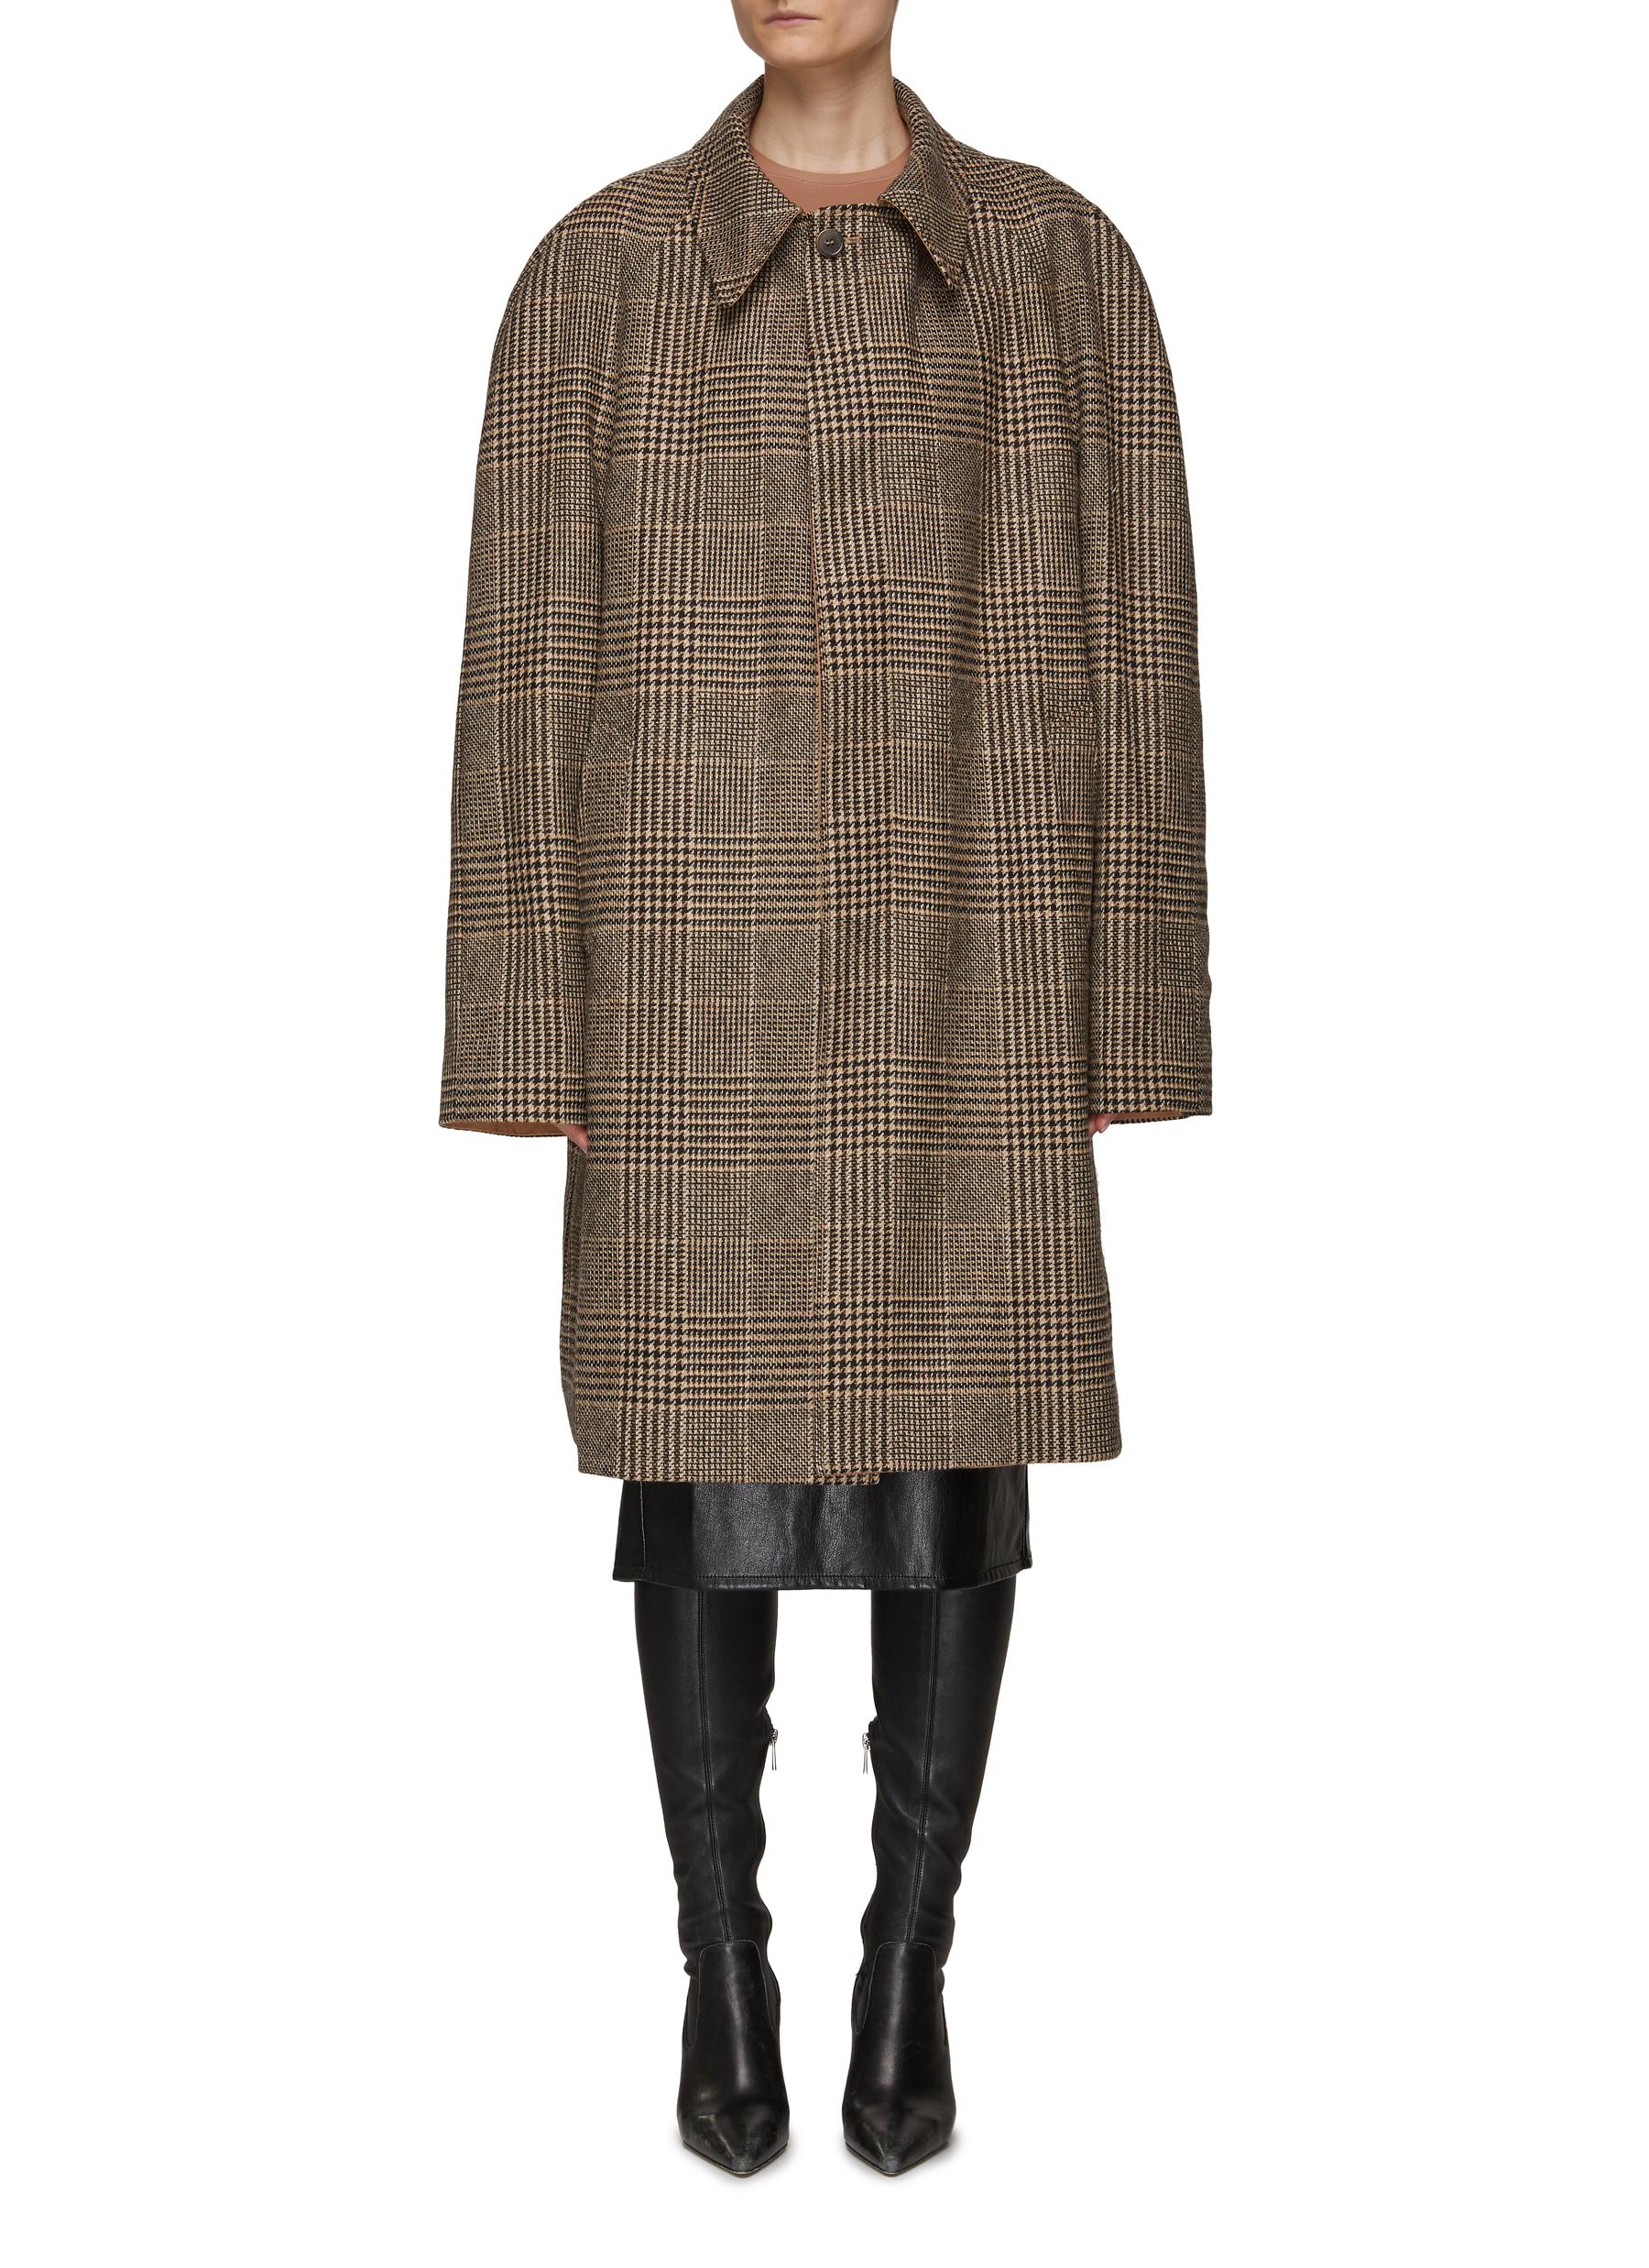 MAISON MARGIELA REVERSIBLE SINGLE BREASTED WOOL COTTON BLEND TRENCH COAT